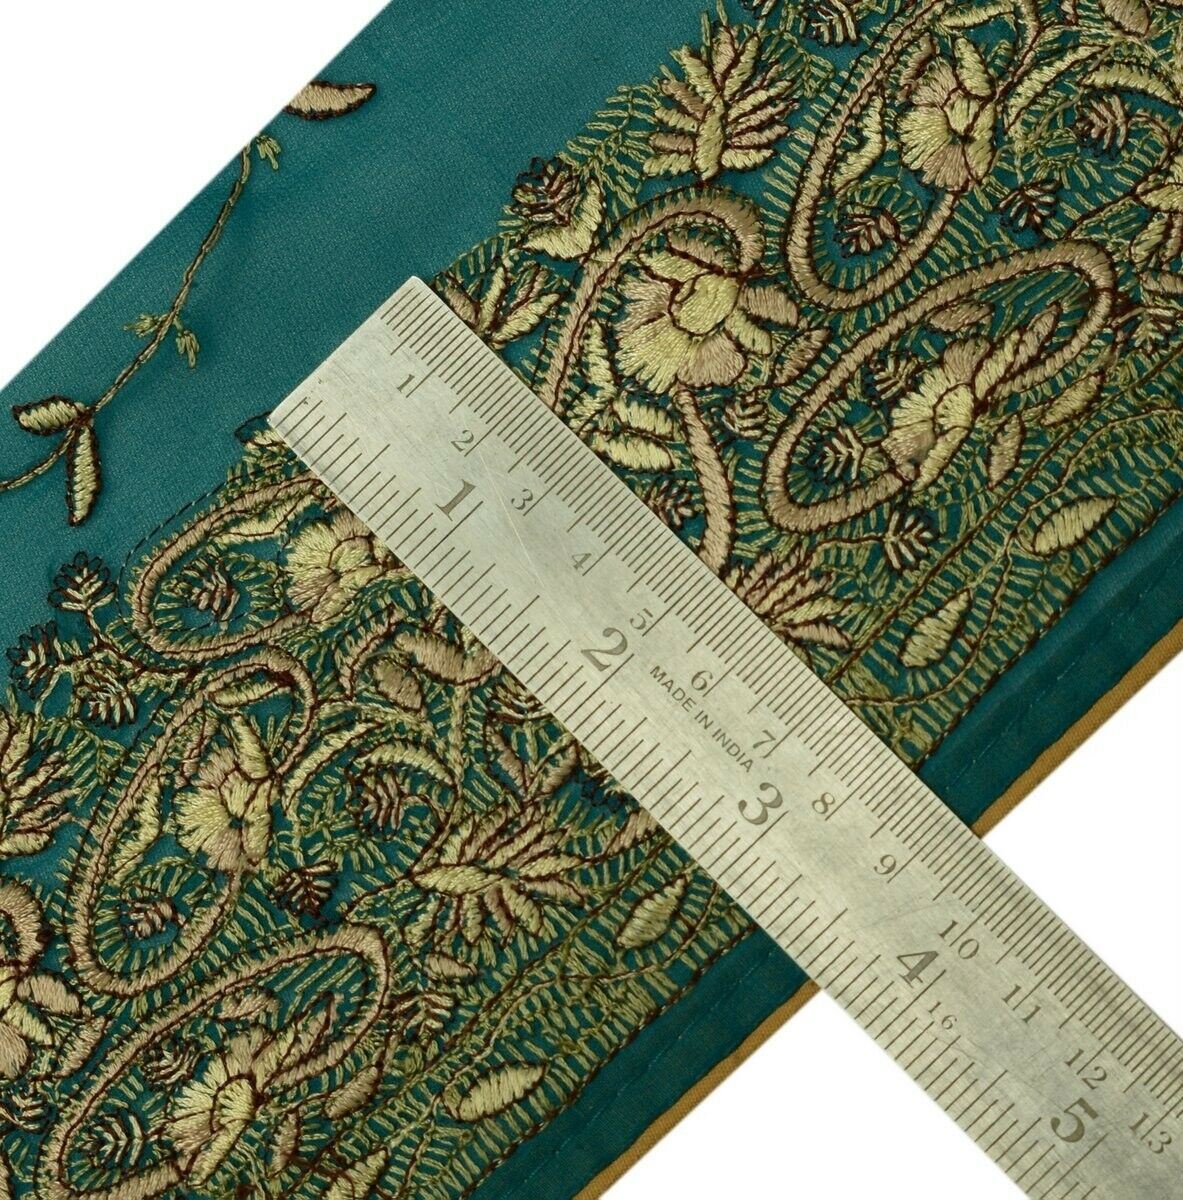 Vintage Saree Border Indian Craft Trim Paisley Embroidered Green Ribbon Lace